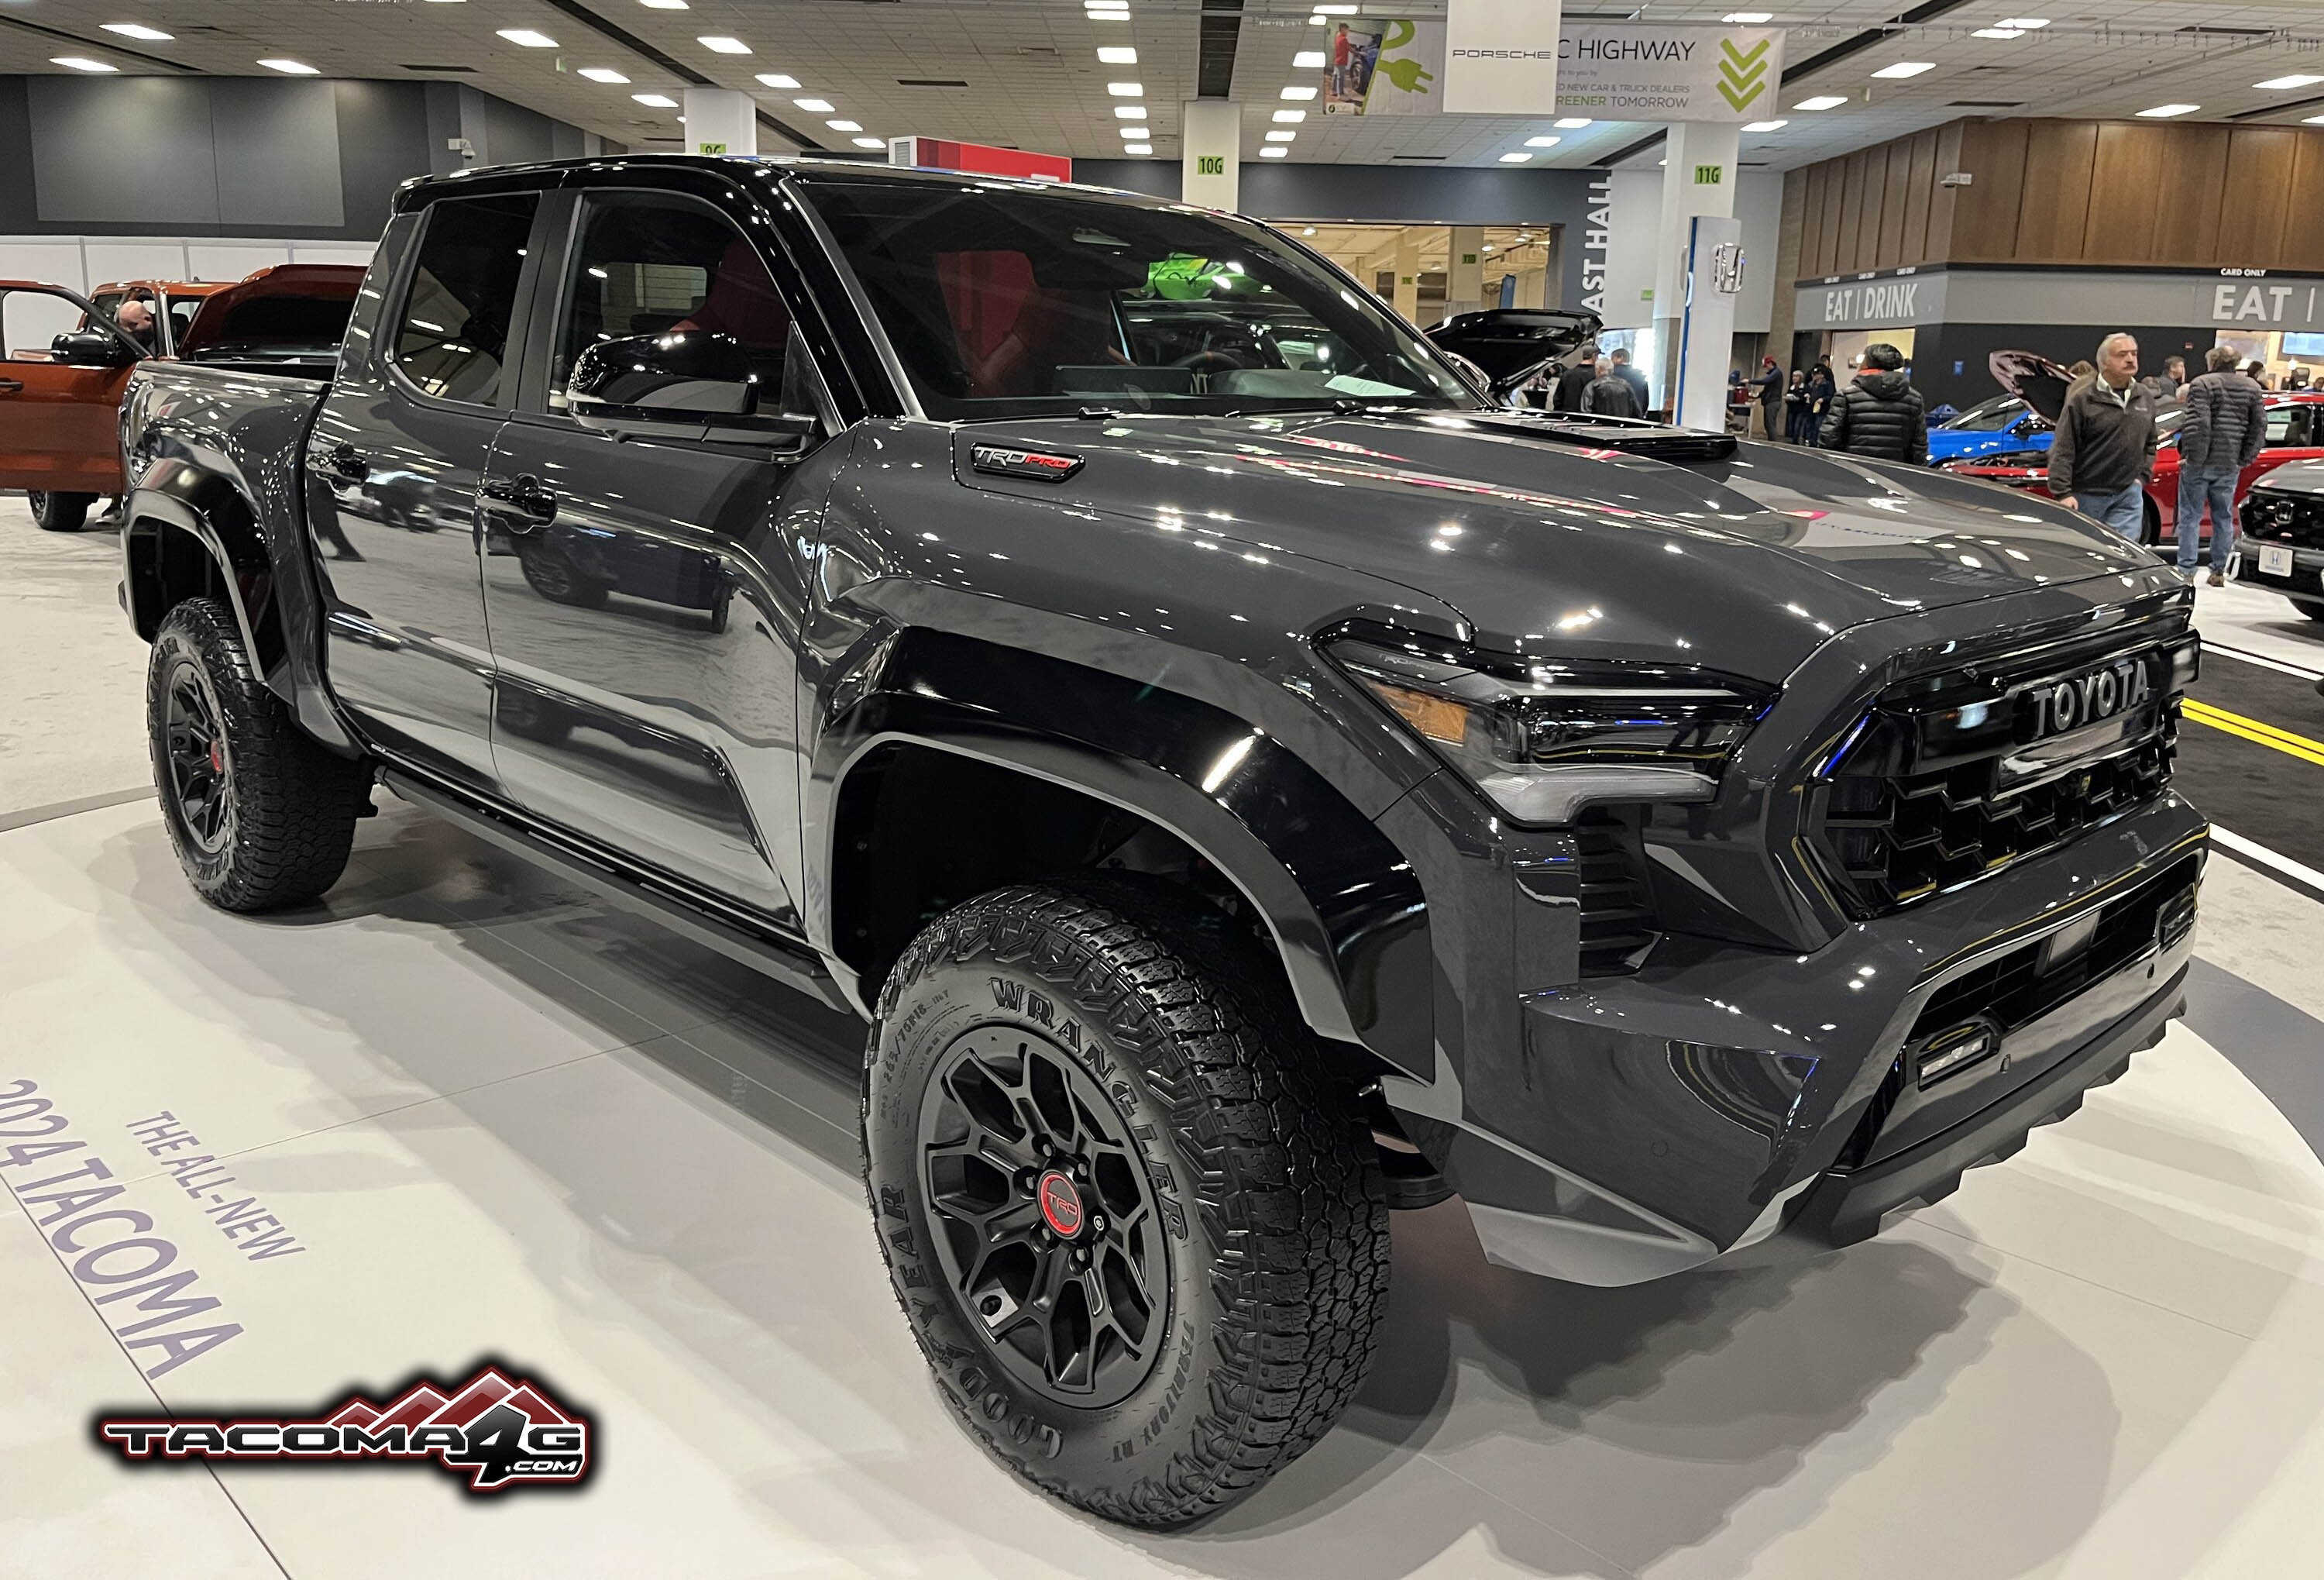 2024 Tacoma 2024 Tacoma TRD Pro in Underground Color at Seattle Auto Show IMG_9093